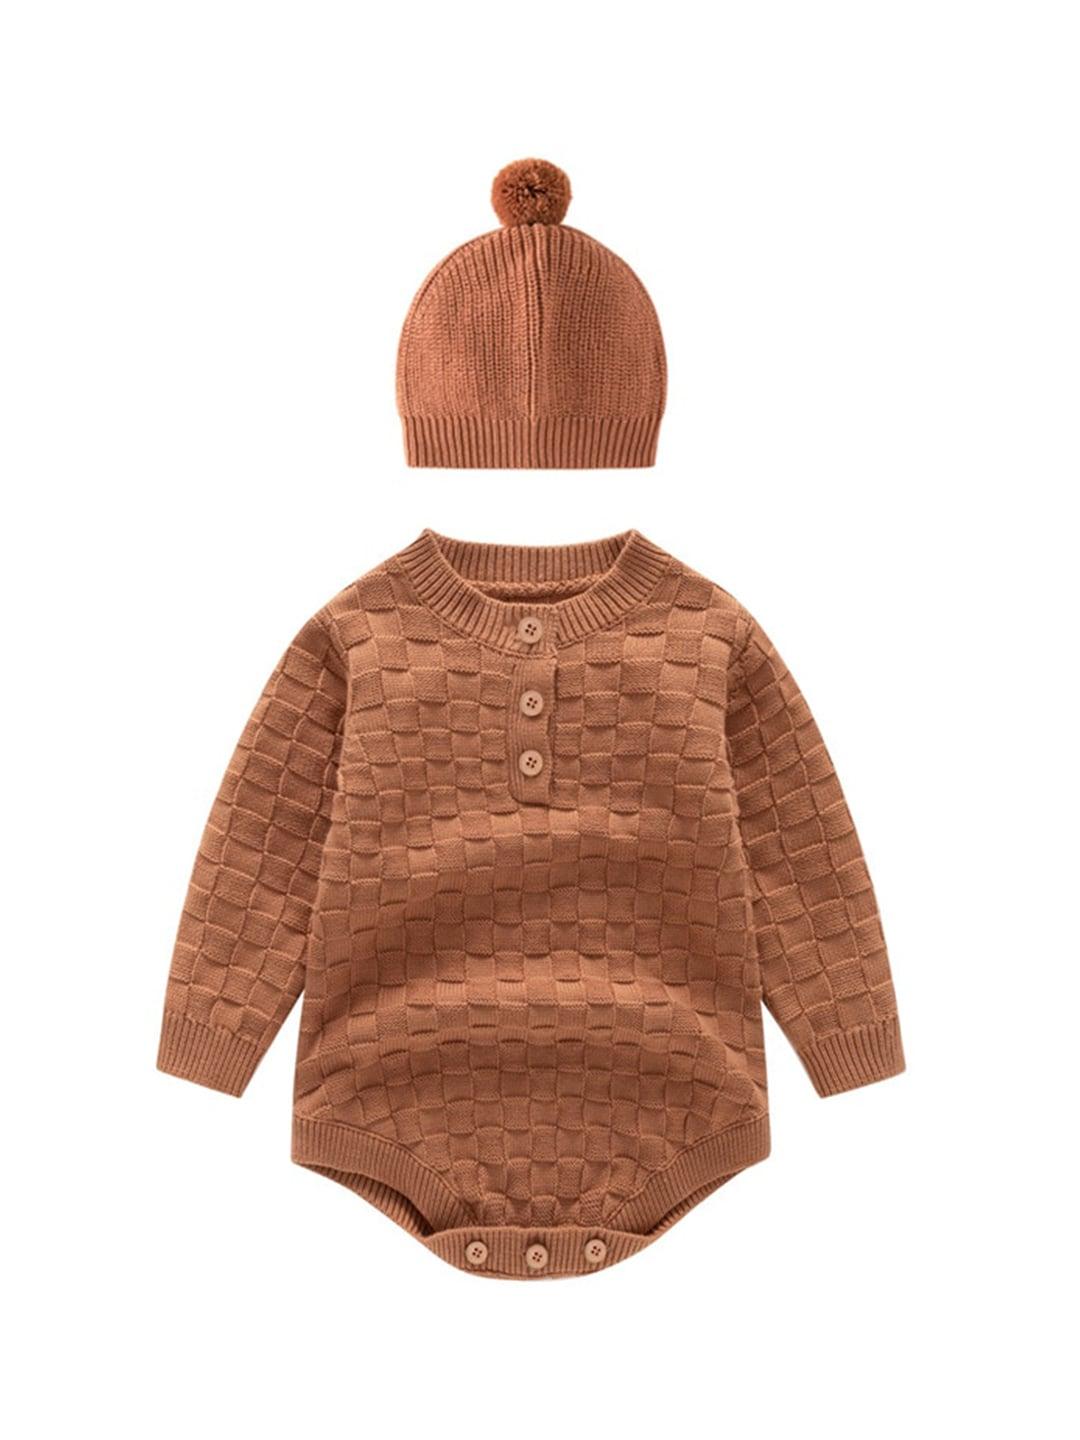 stylecast brown infant kids knitted cotton romper with beanie